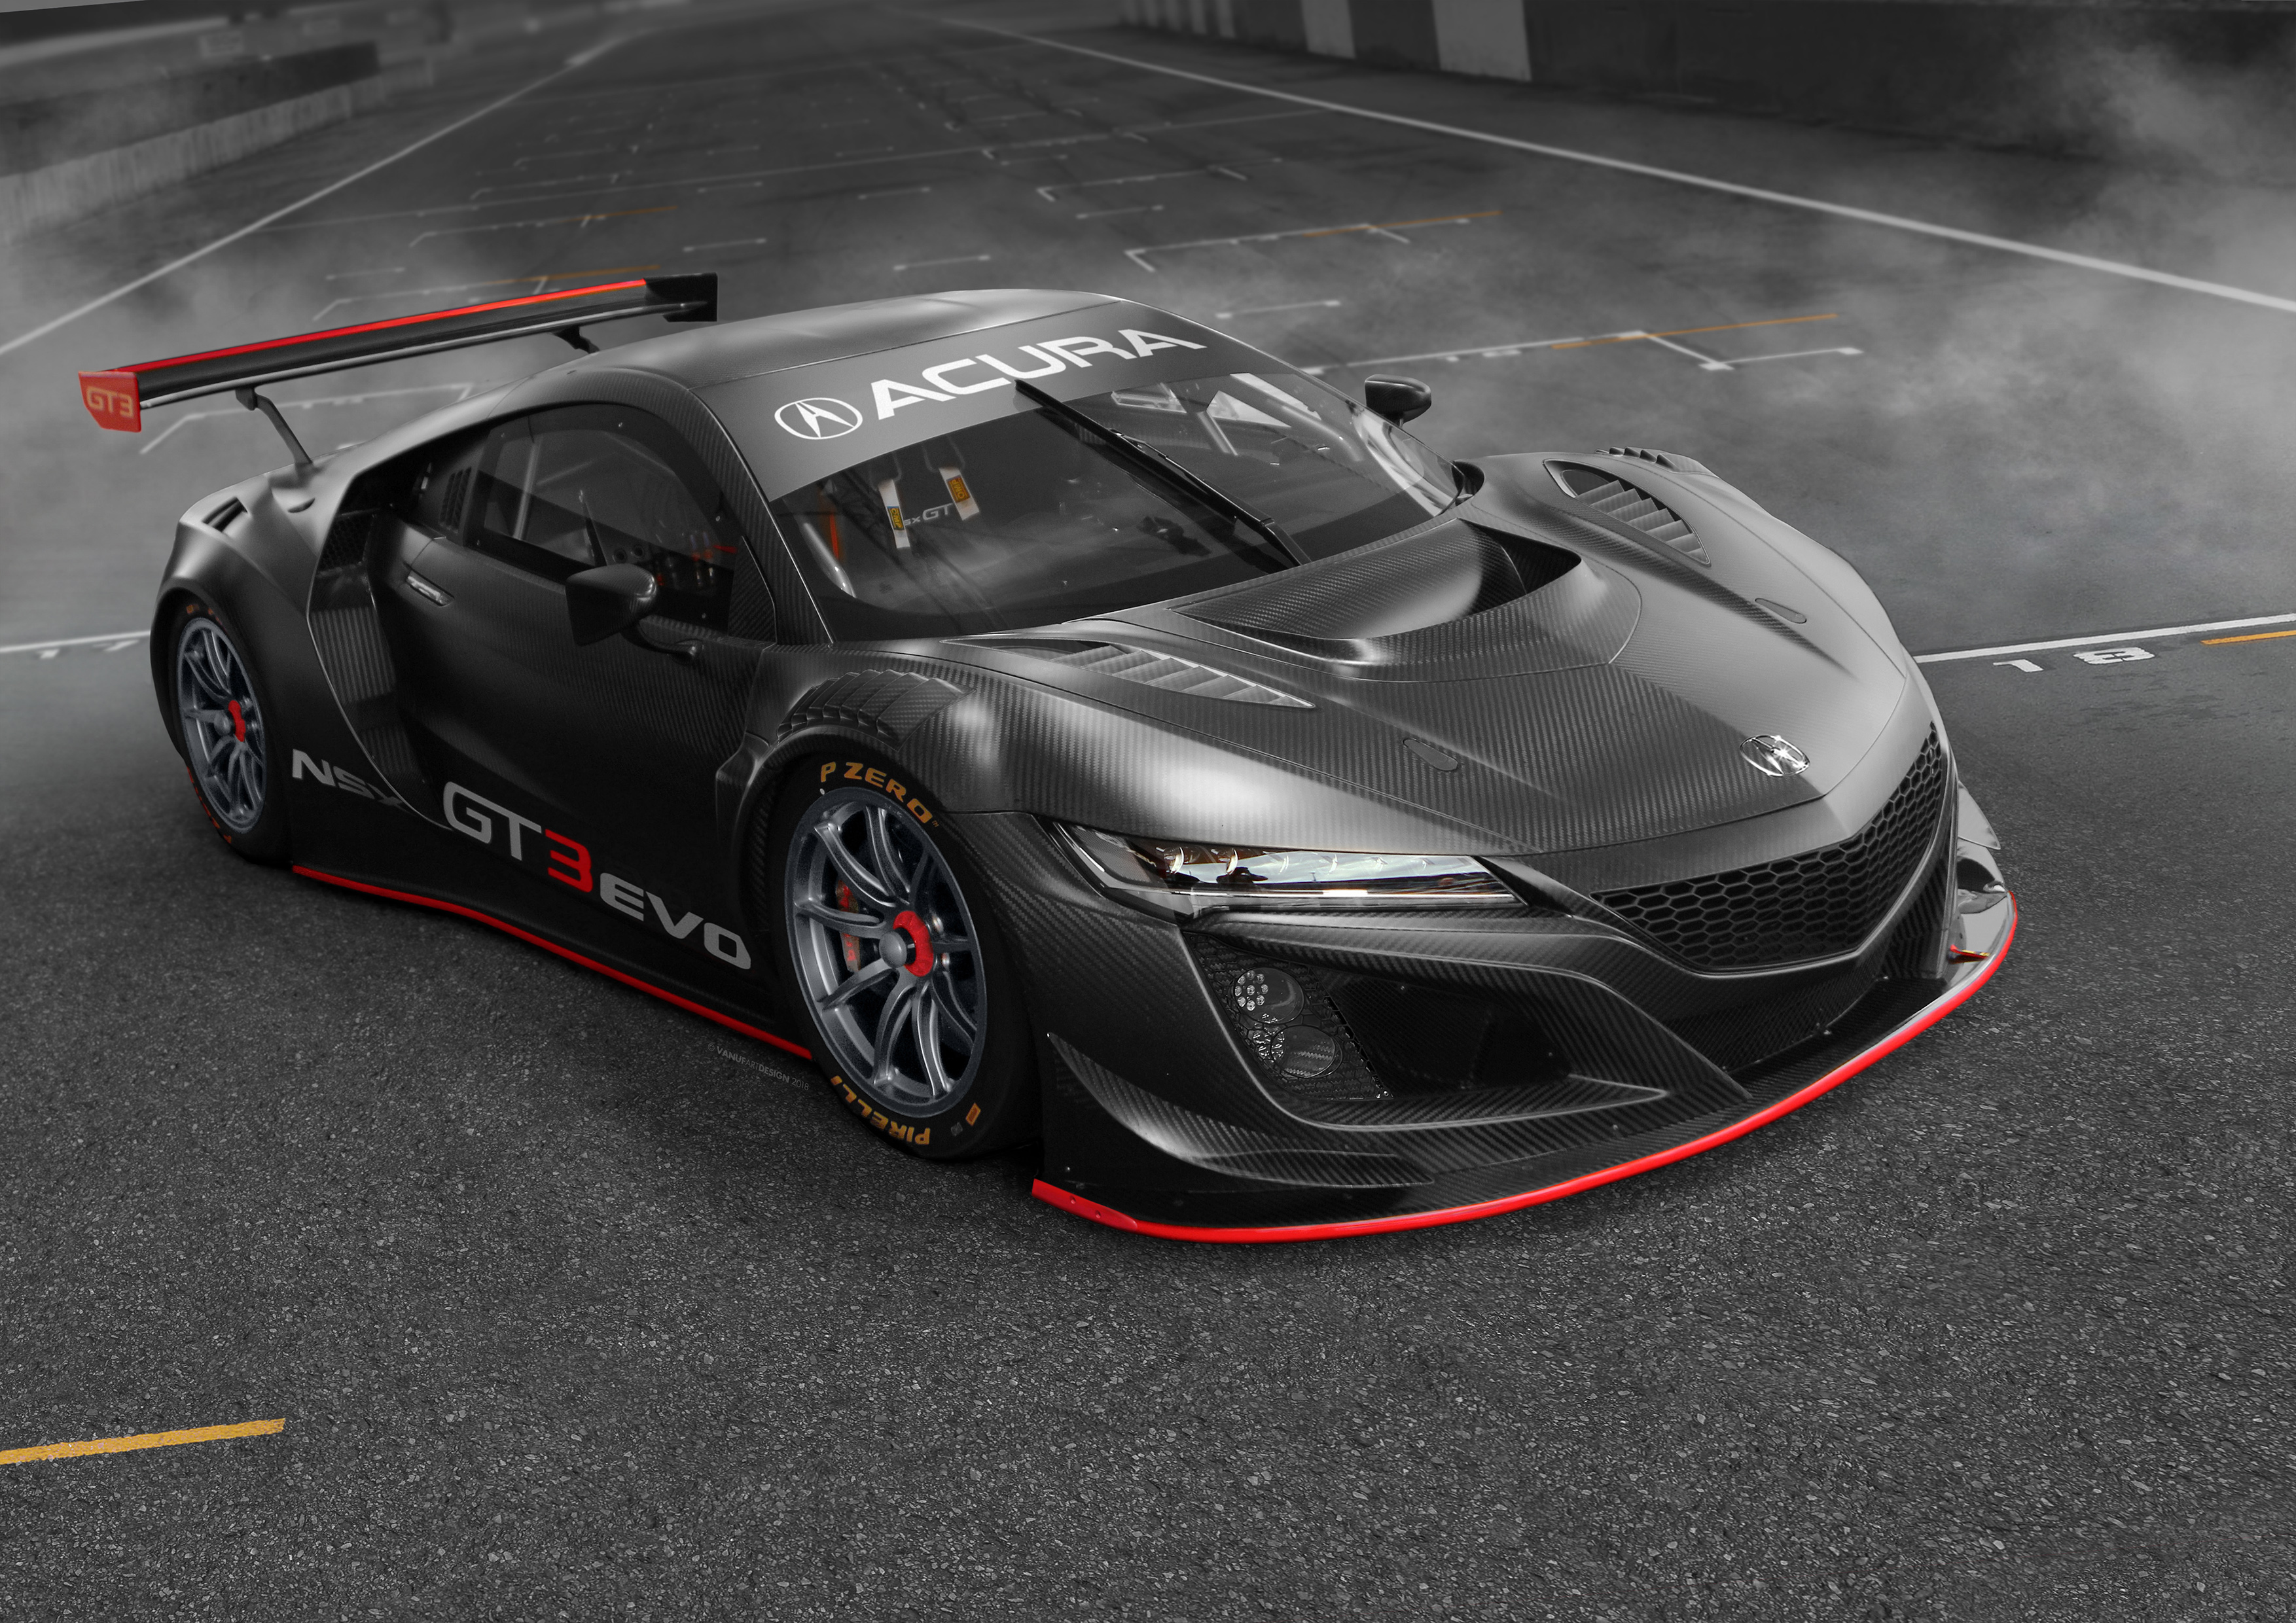 Acura Nsx Gt3 Evo 2019 Hd Cars 4k Wallpapers Images Backgrounds Photos And Pictures